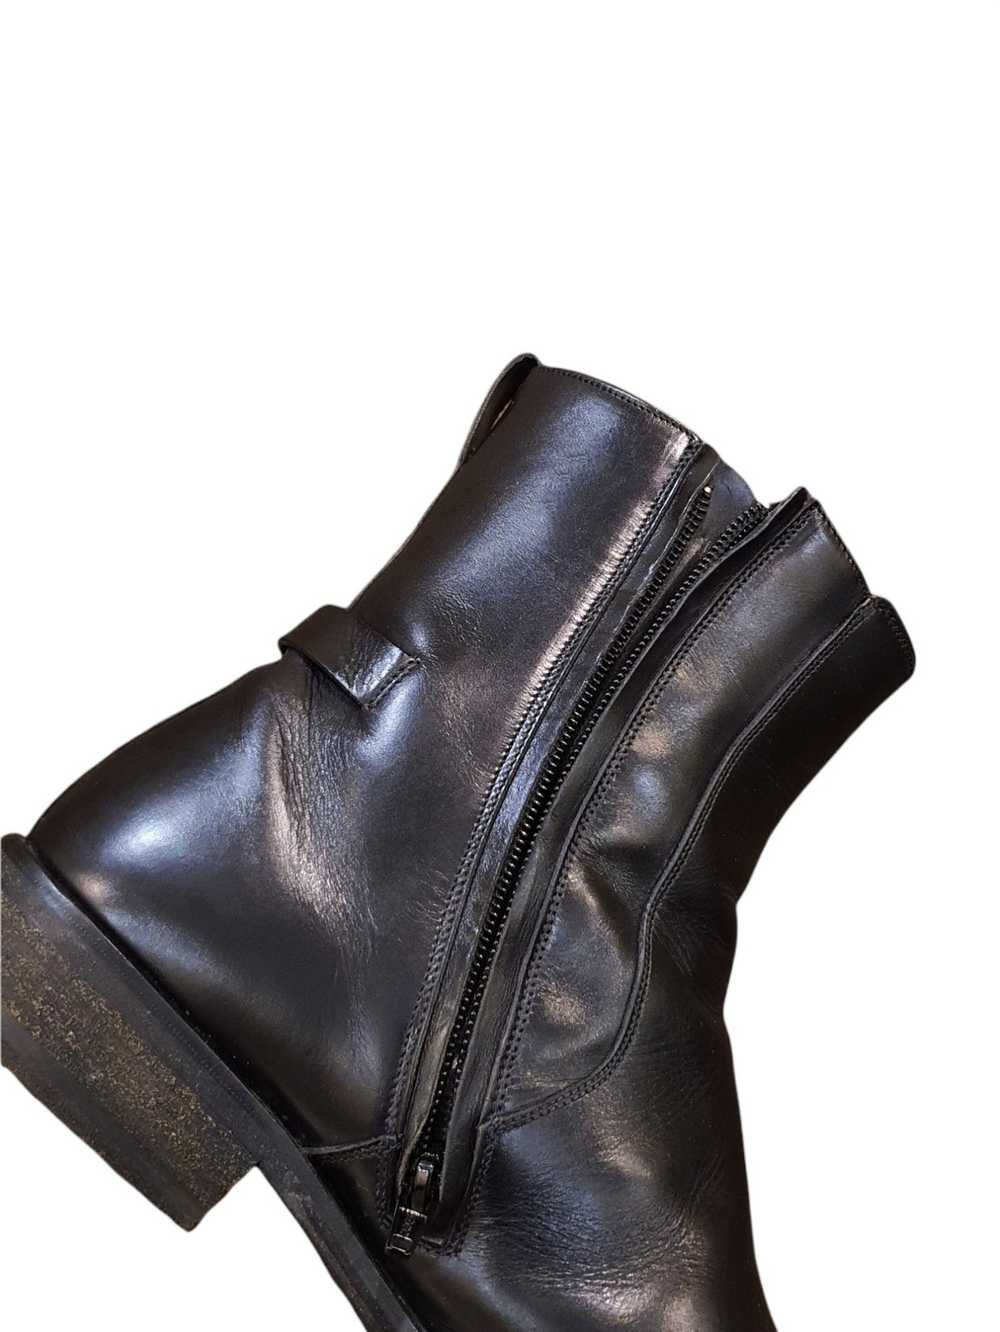 Gucci $1.2k Tom Ford Era Ankle Boots - image 2